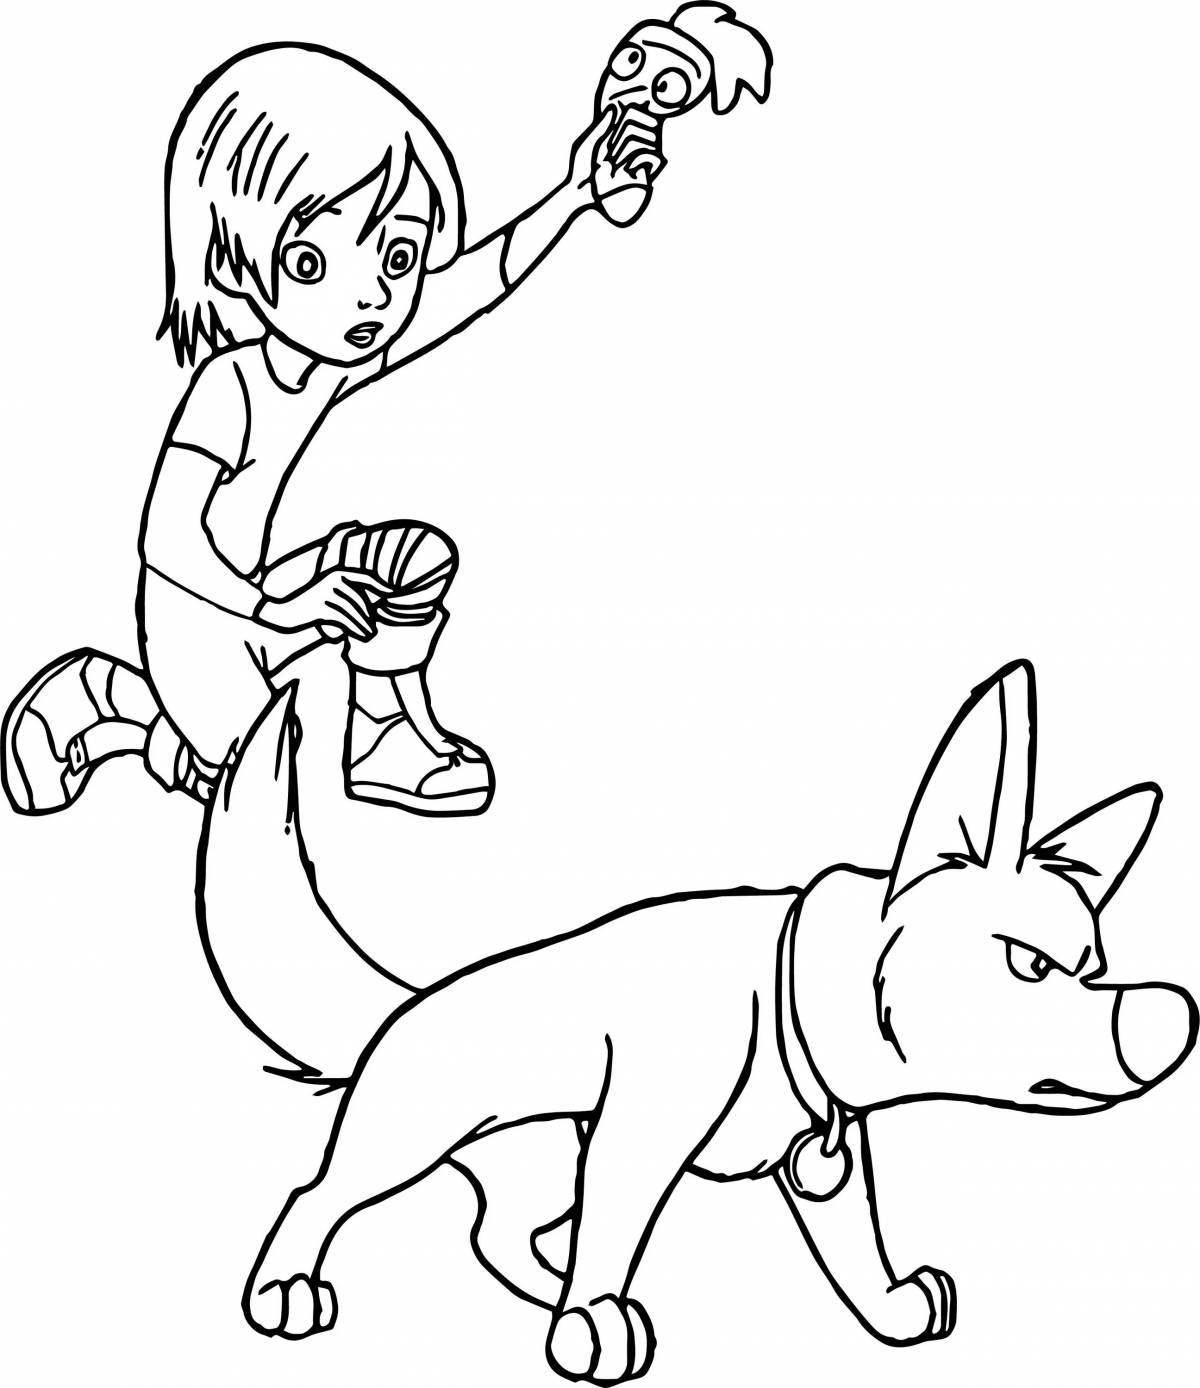 Animated super dog coloring book